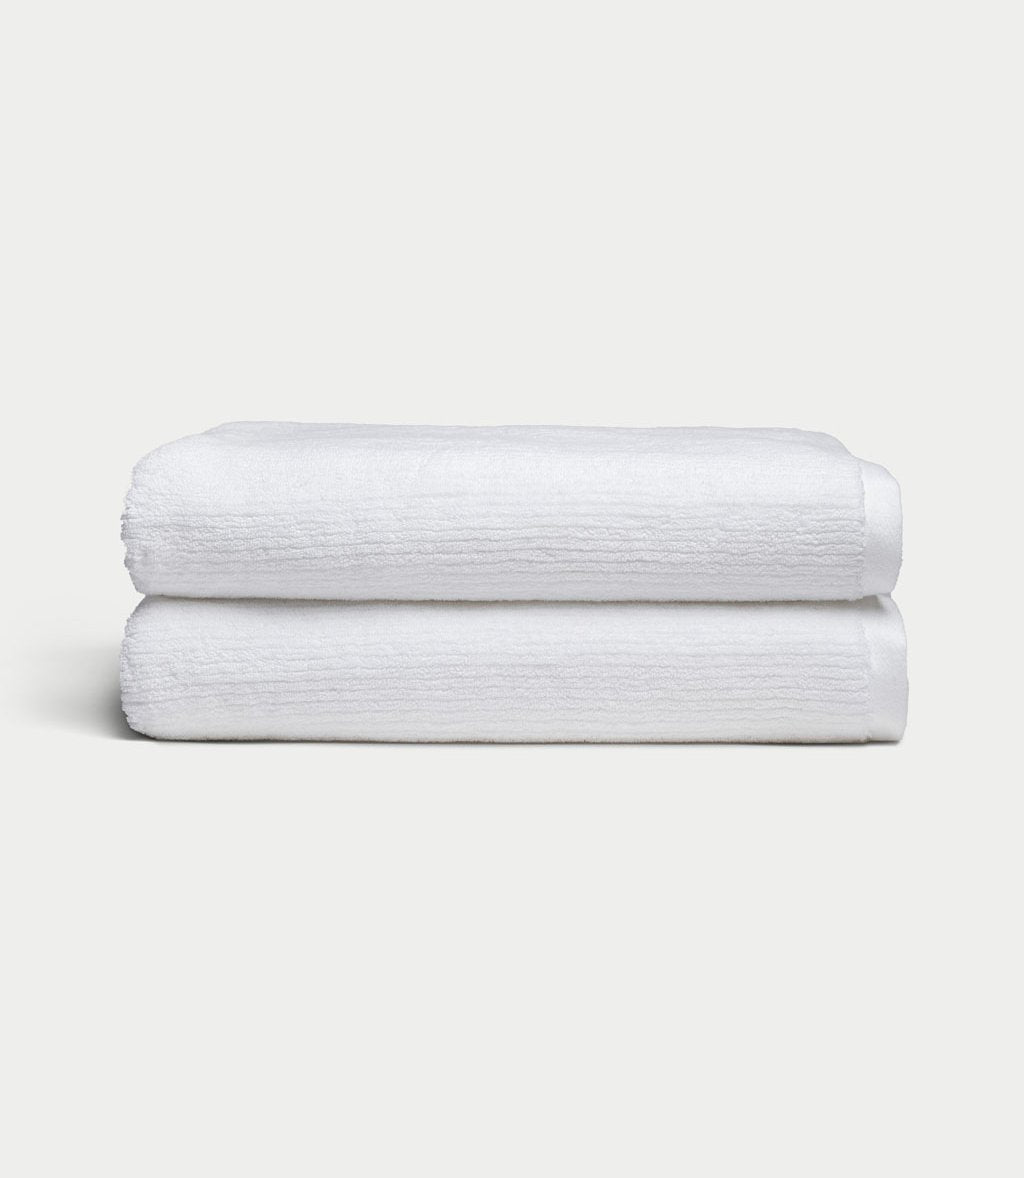 Ribbed Terry Bath Sheets in the color White. Photo of product taken with white background. 